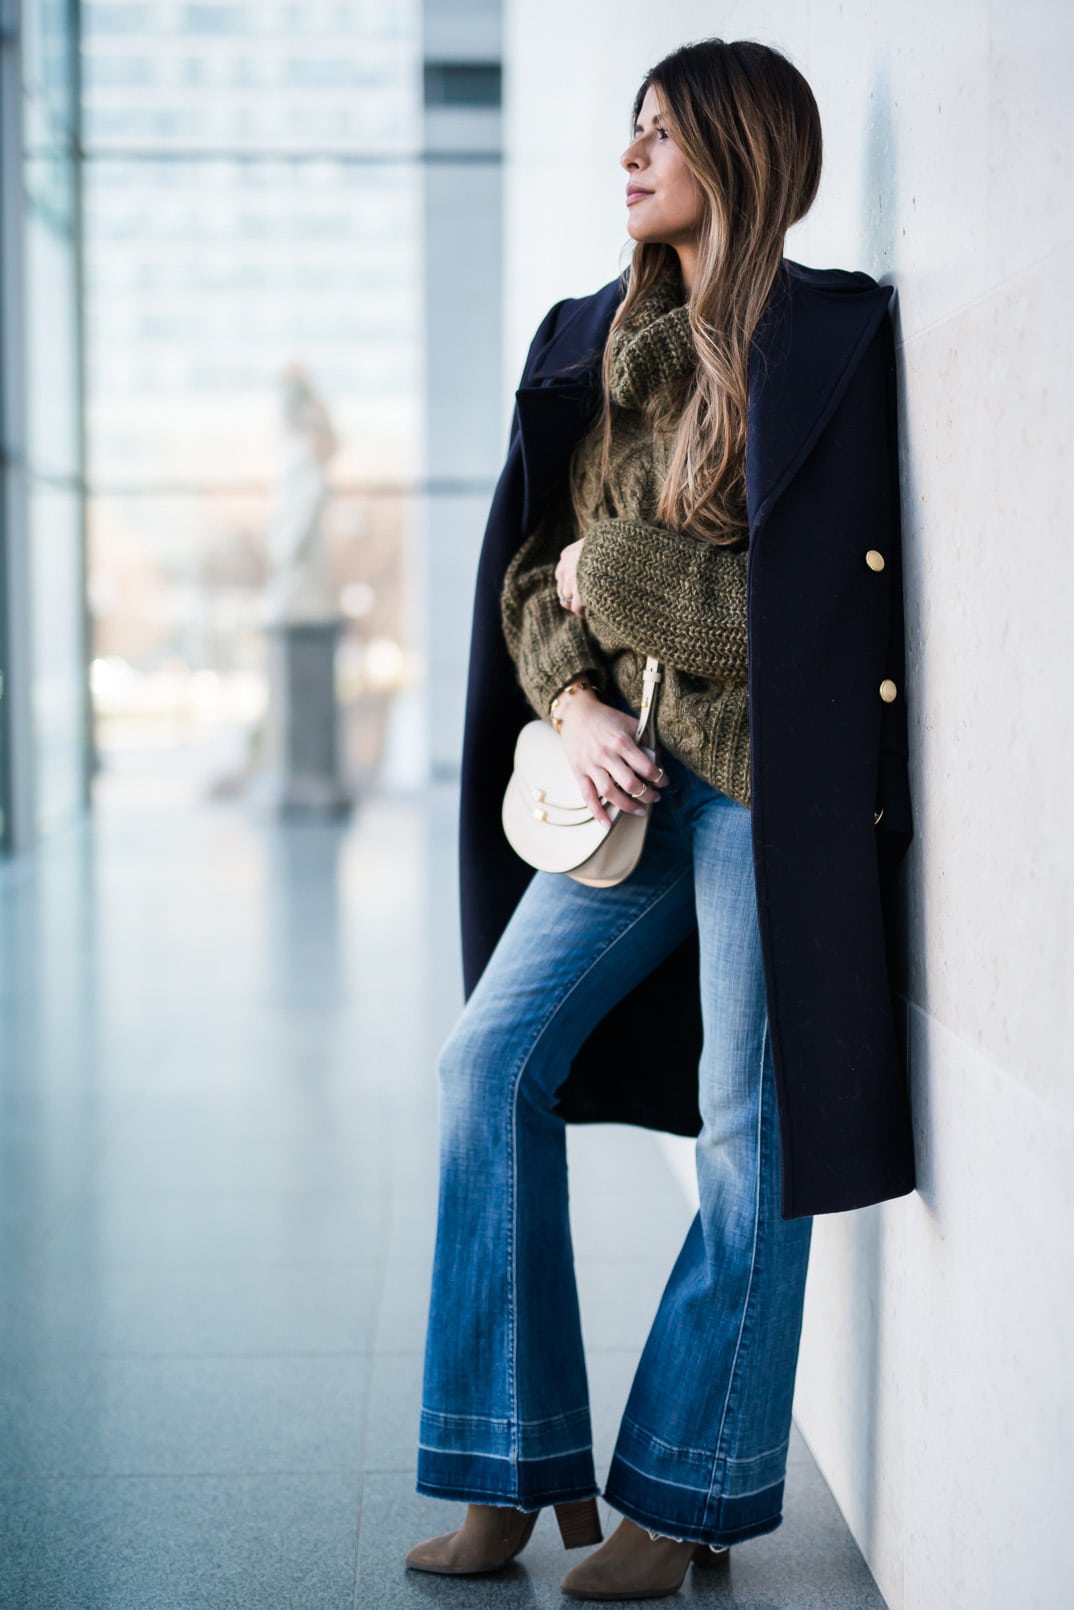 Pam Hetlinger, The Girl From Panama wearing a Khaki sweater, h&m navy coat, 7 for all mankind ginger jeans, gray booties, and chloe georgia bag.